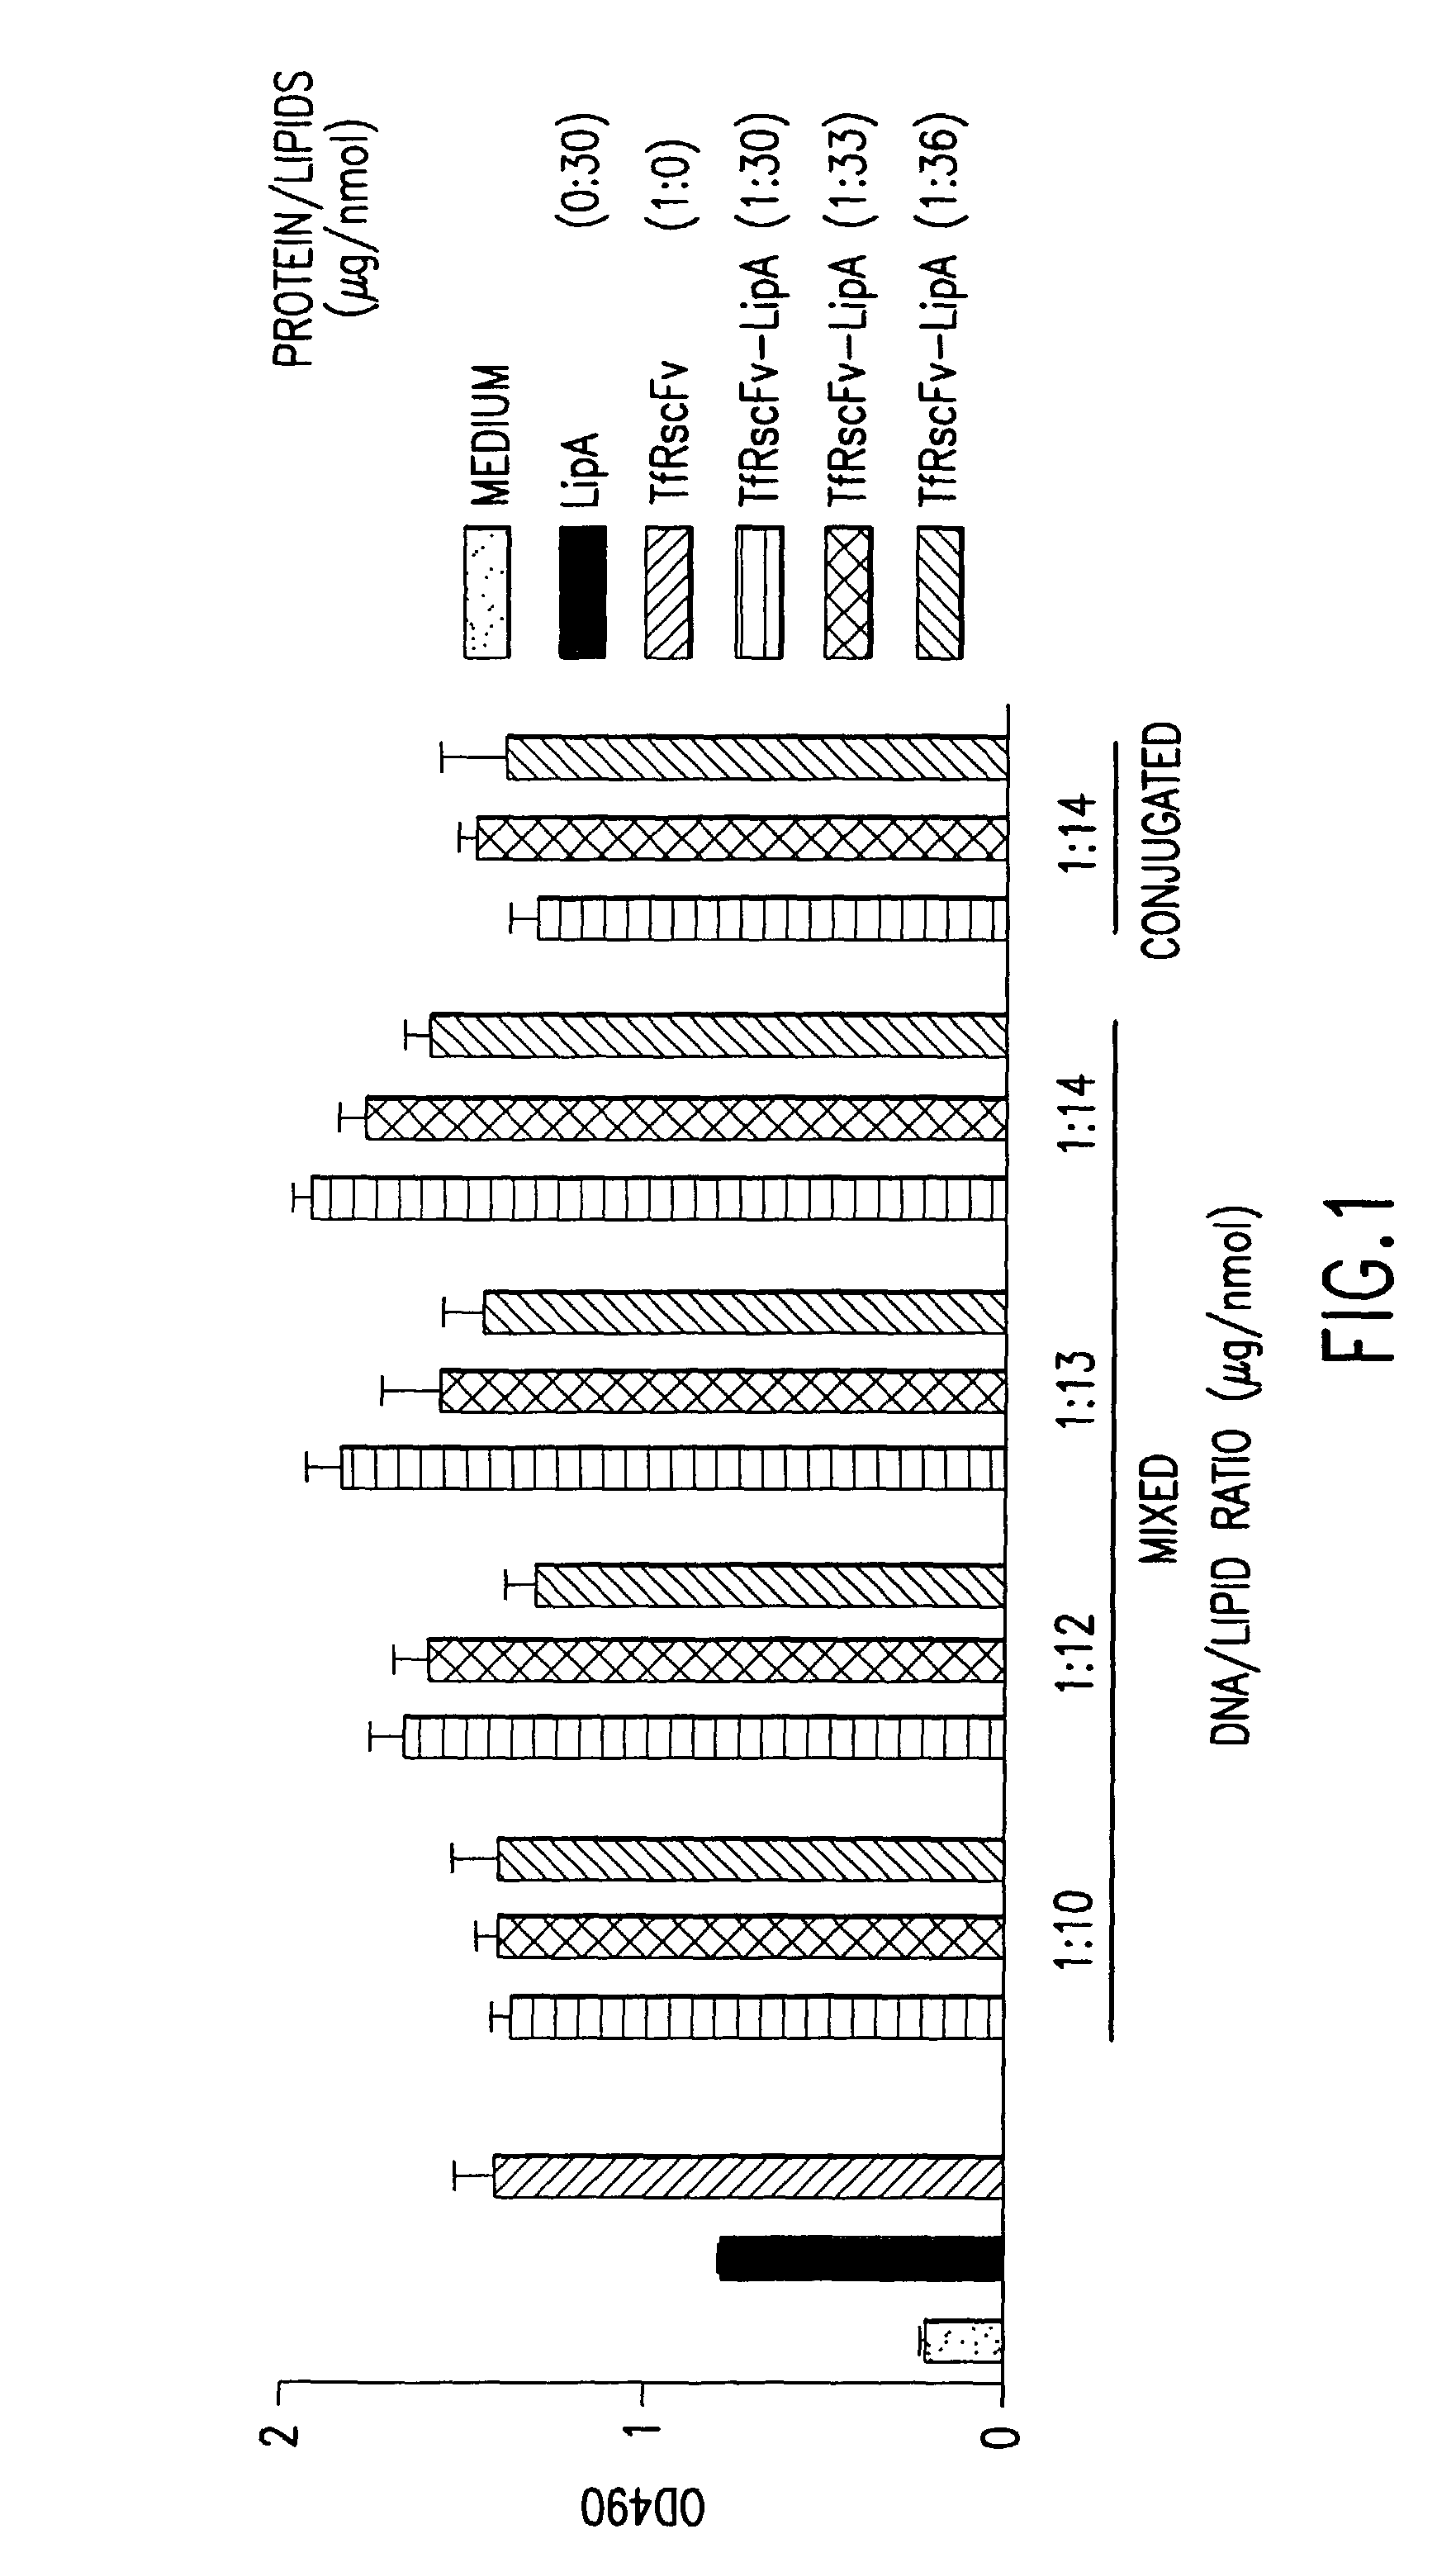 Simplified and improved method for preparing an antibody or an antibody fragment targeted immunoliposome for systemic administration of a therapeutic or diagnostic agent